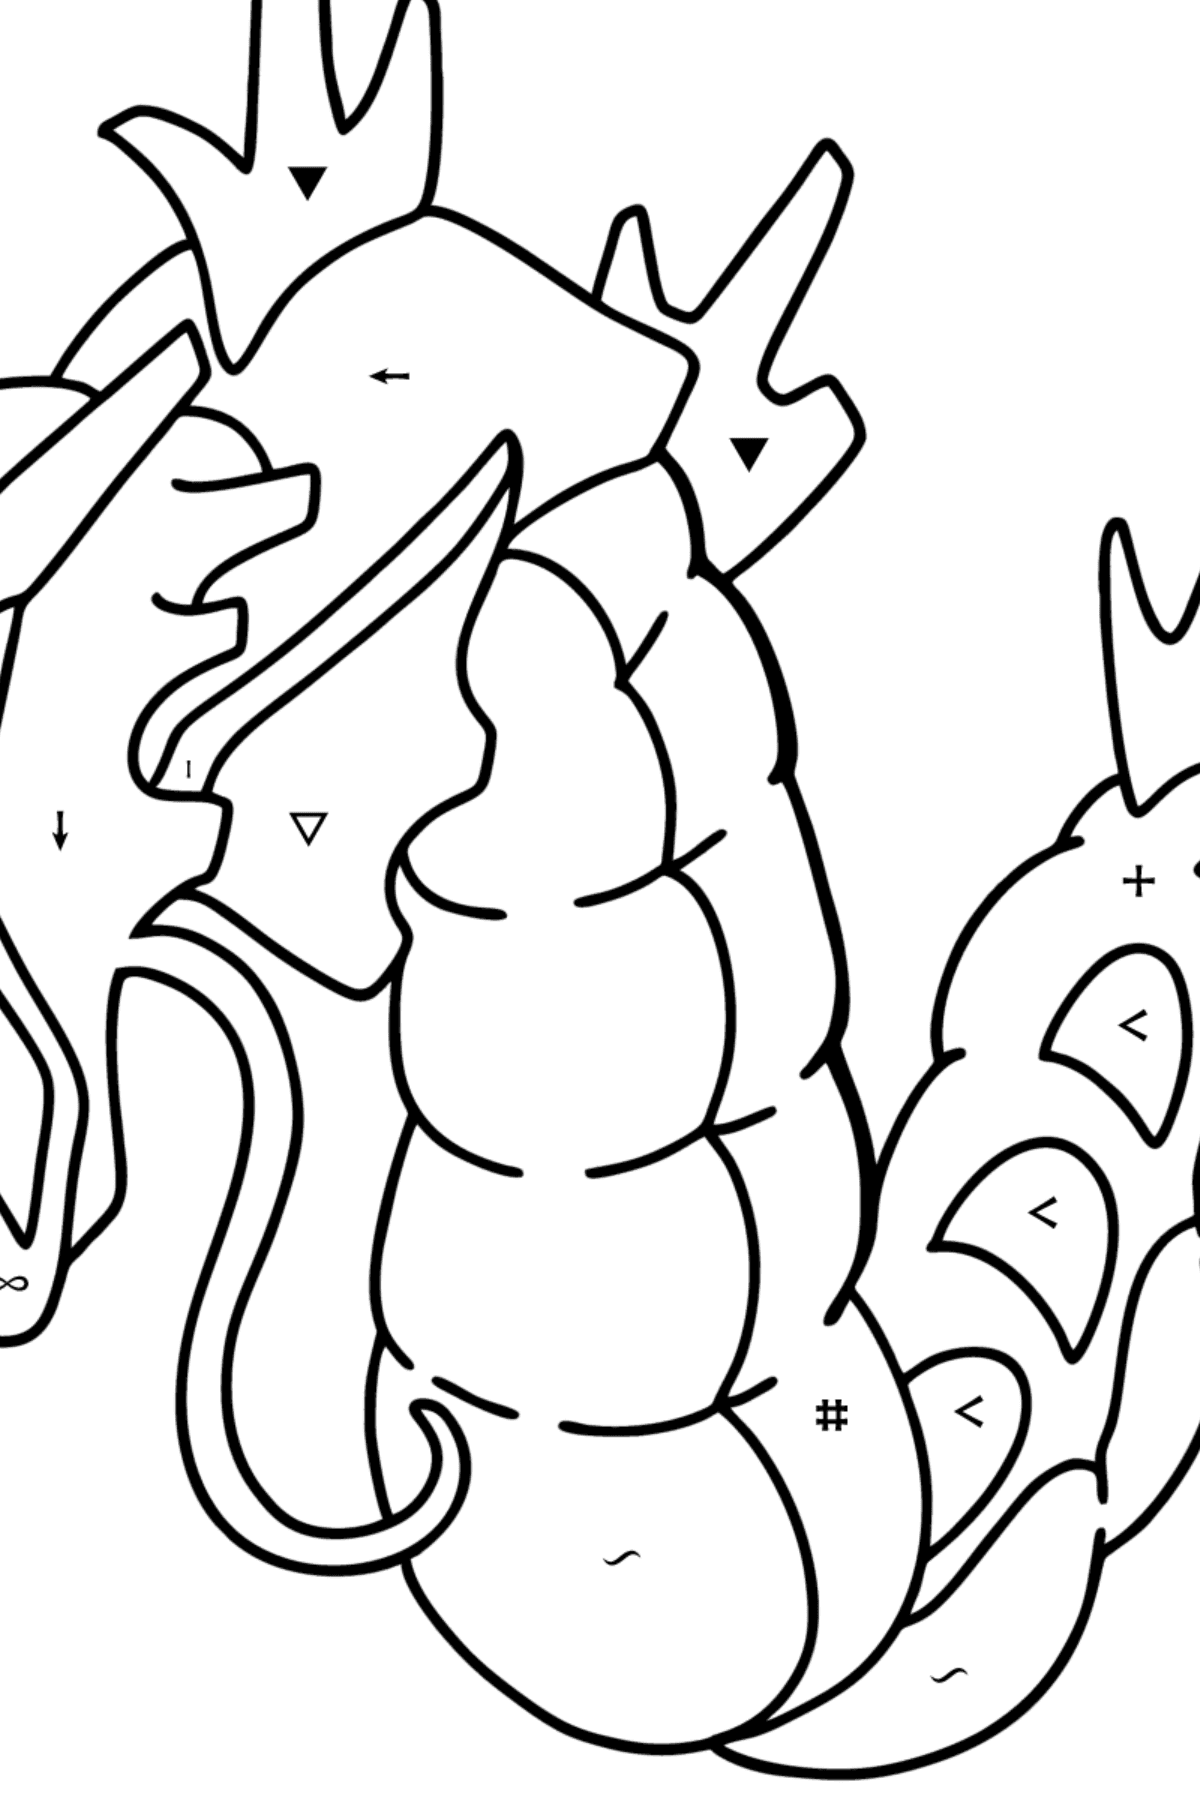 Coloring page Pokemon Go Gyarados - Coloring by Symbols for Kids